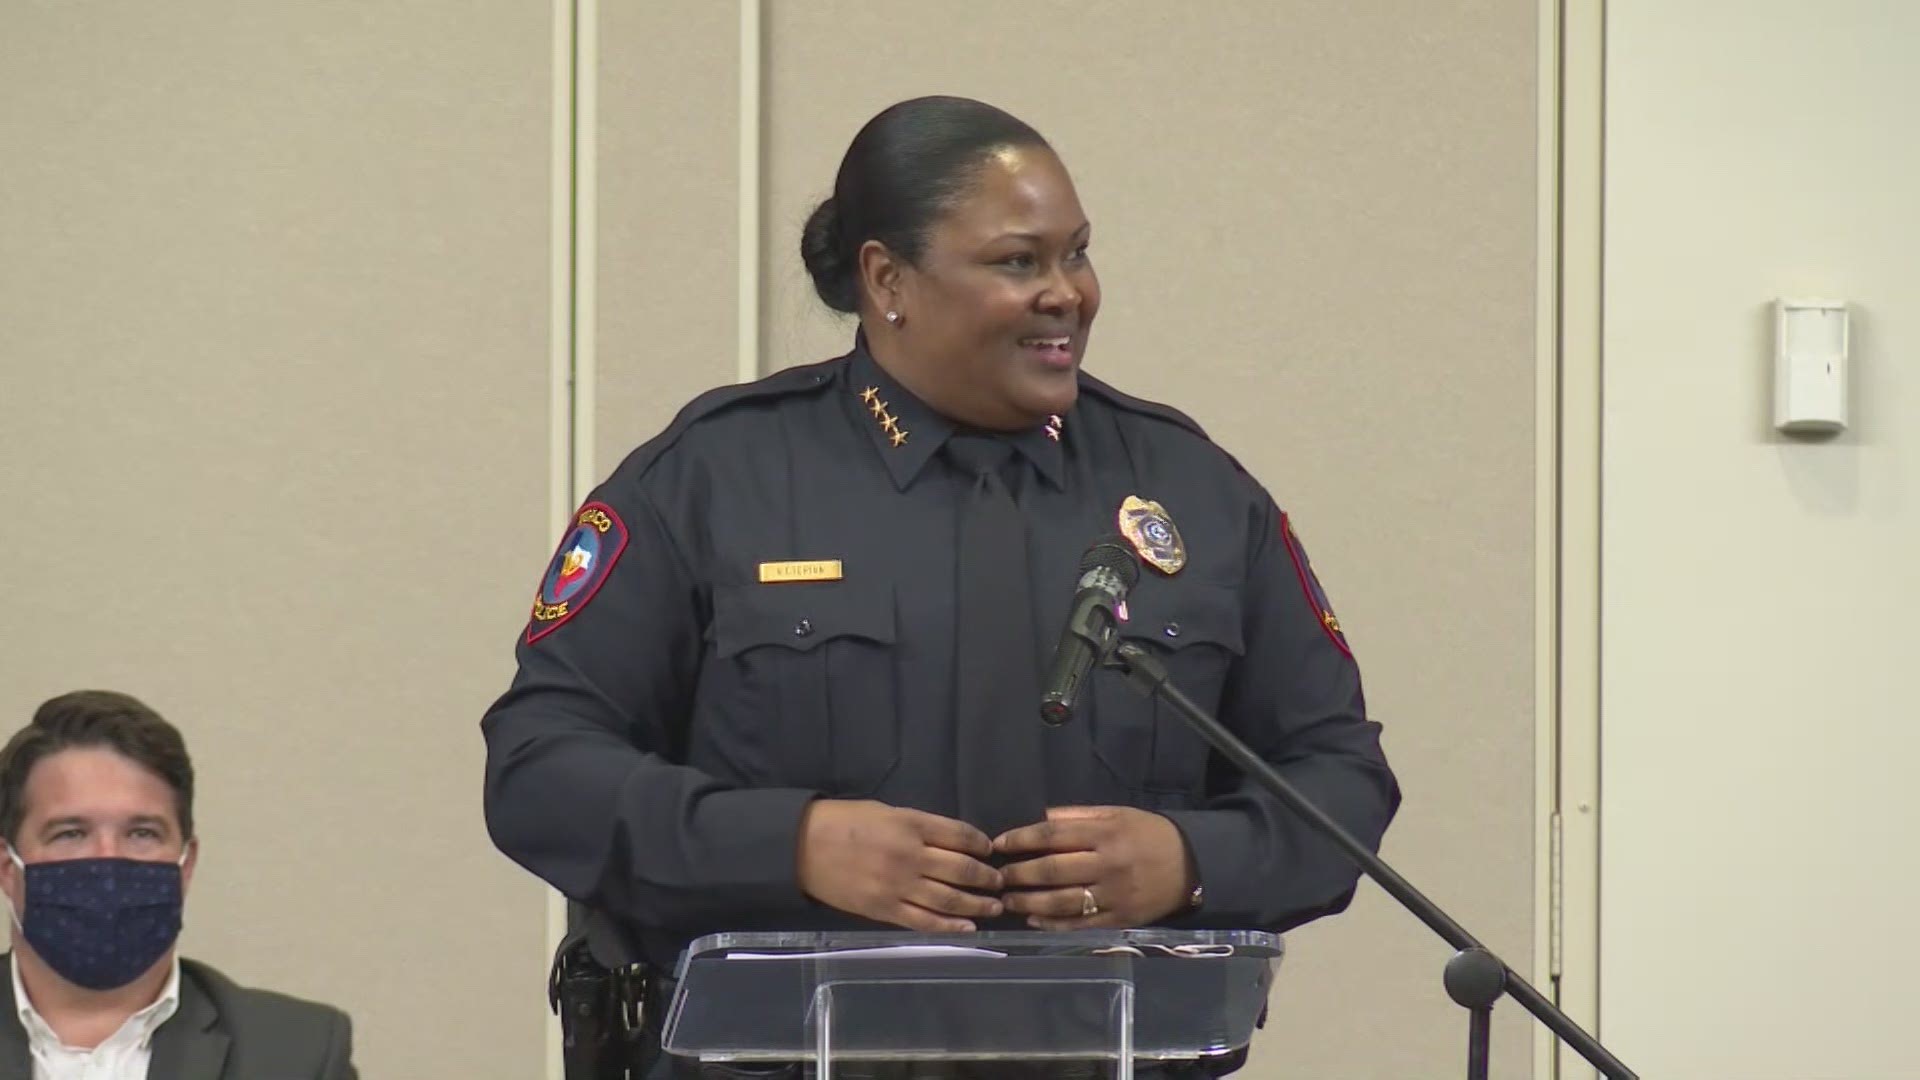 Sheryl Victorian, the city's first female and Black police chief, was selected from four finalists and started March 15.